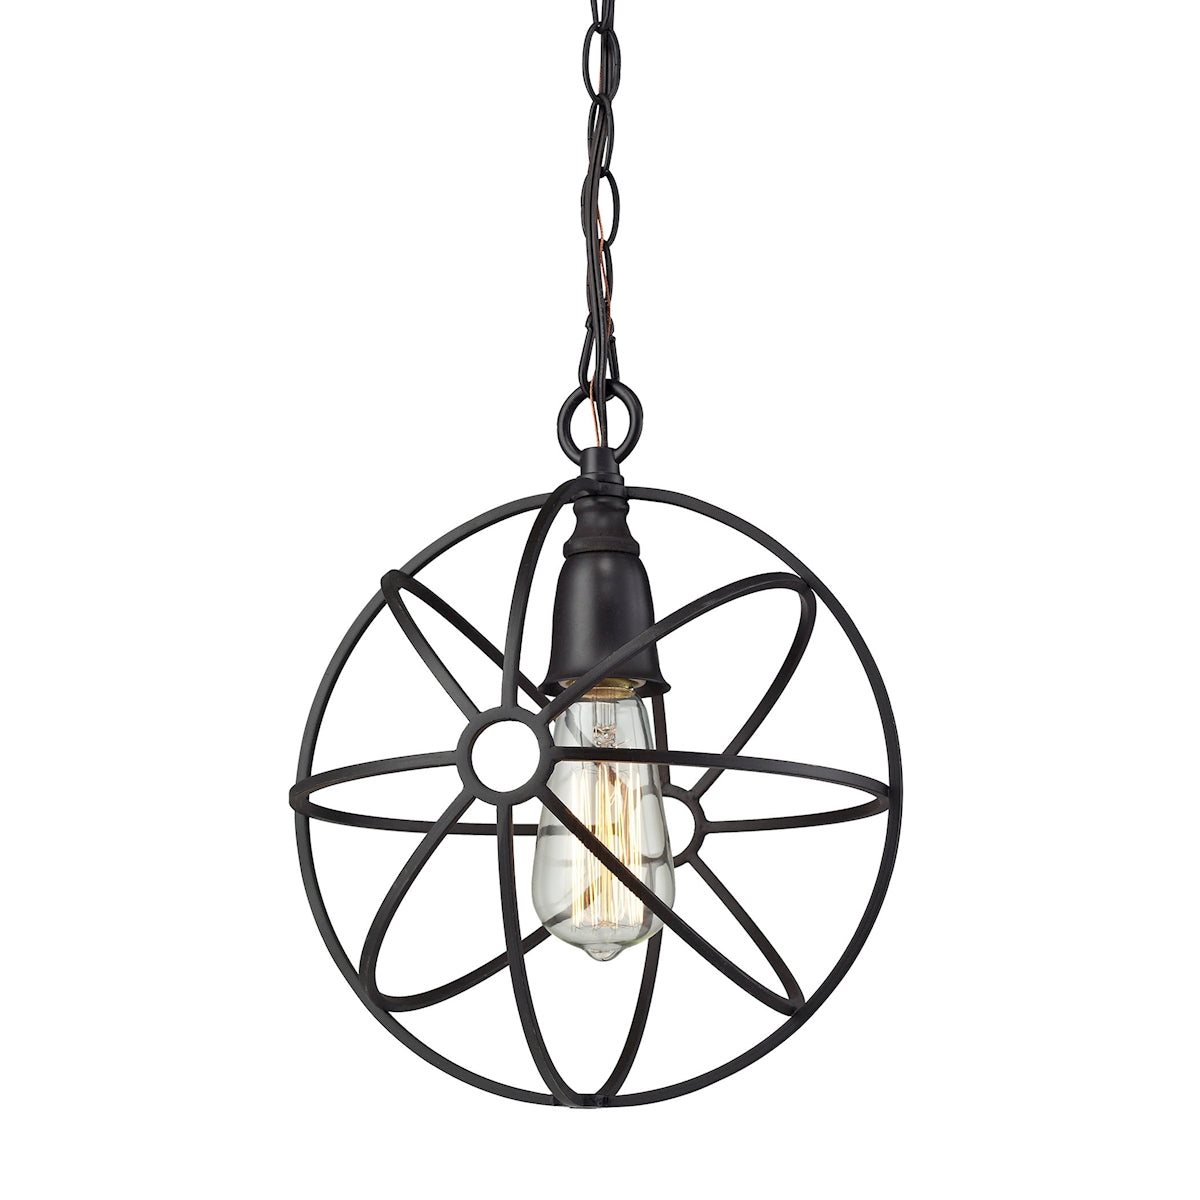 ELK Lighting 14241/1 Yardley 1-Light Mini Pendant in Oil Rubbed Bronze with Wire Cage